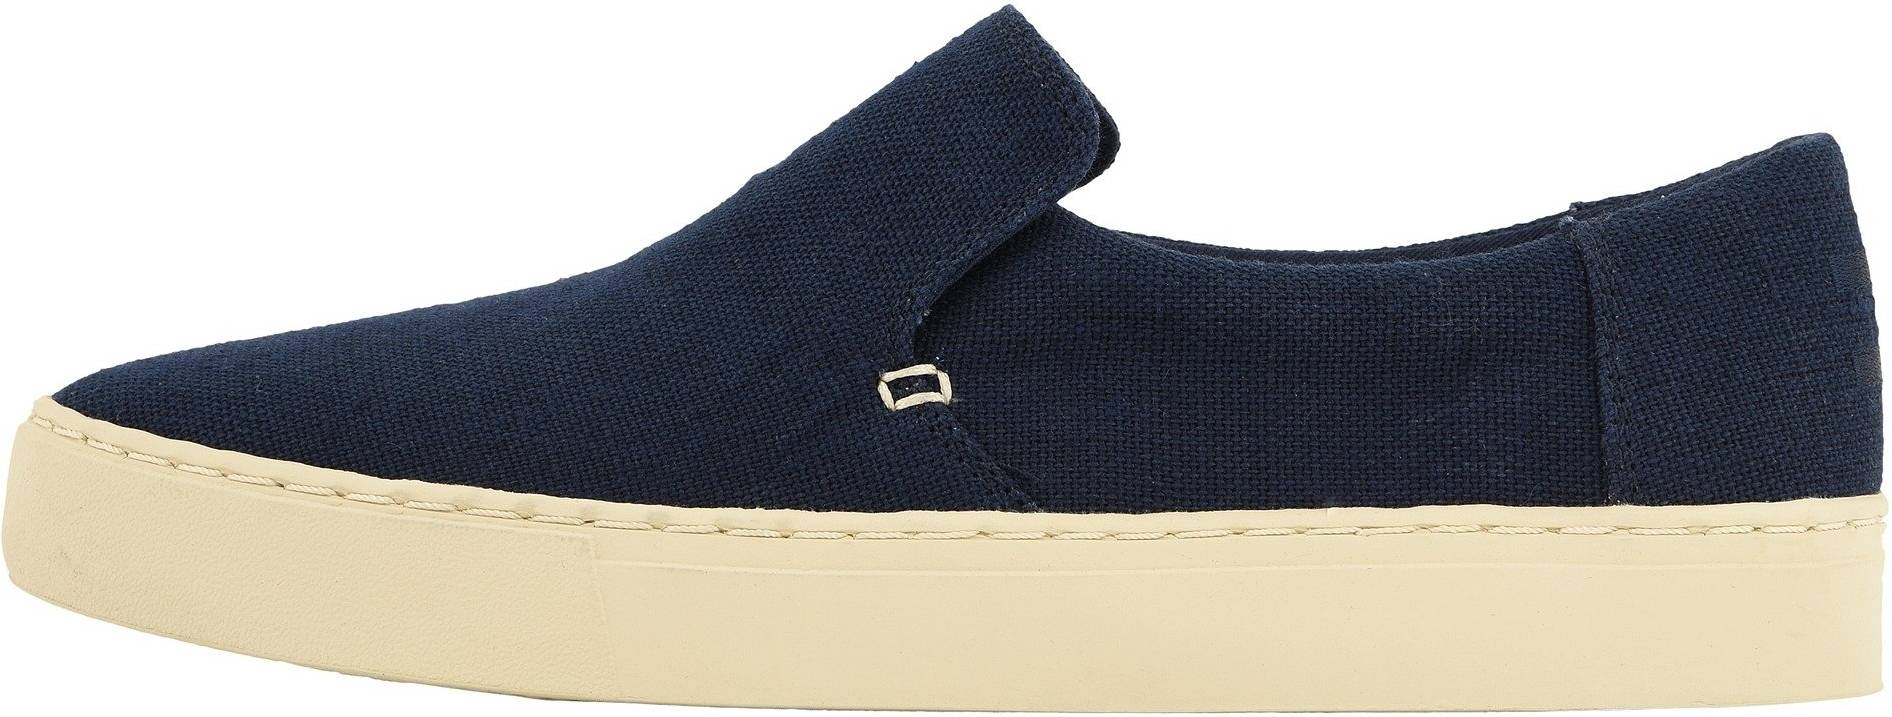 toms heritage canvas mens